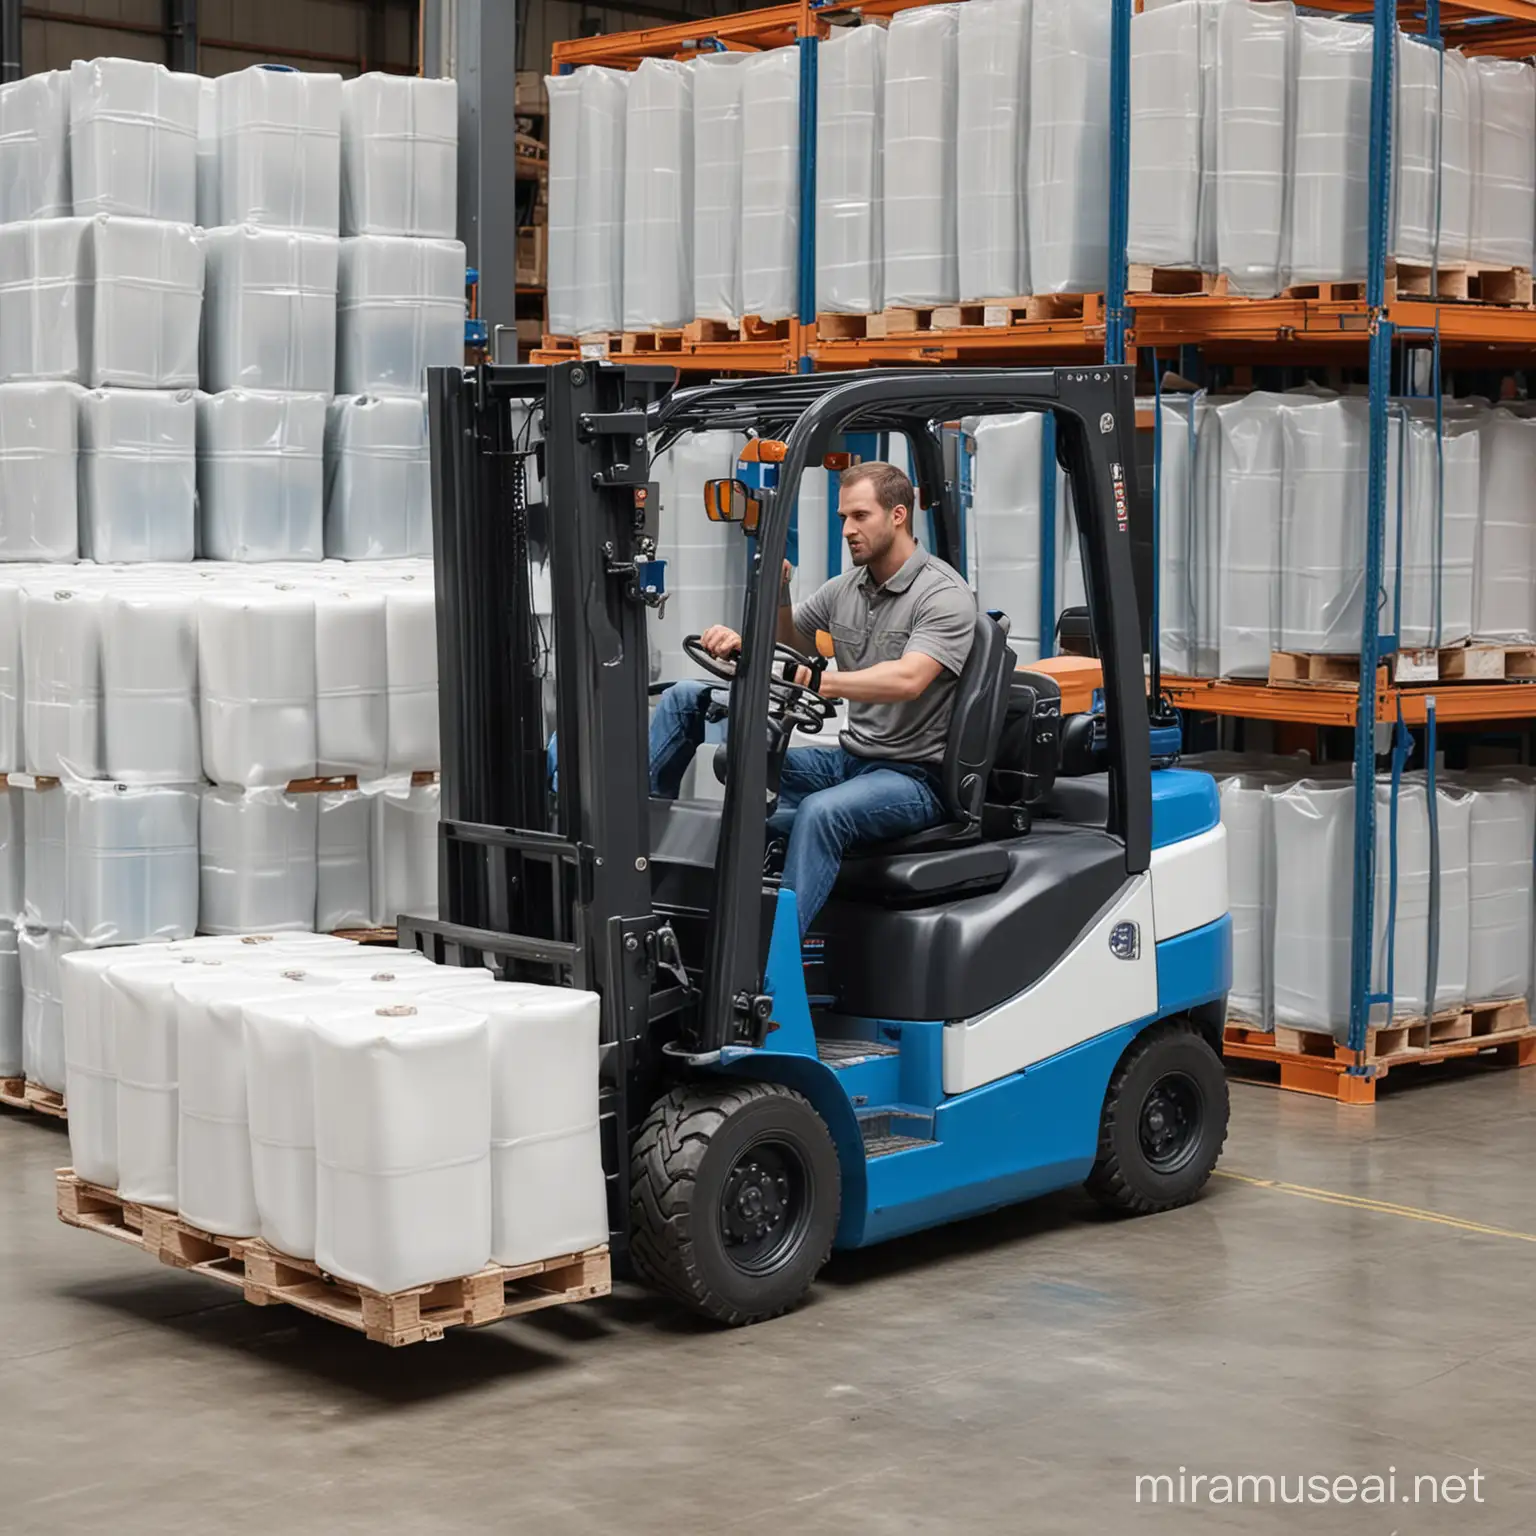 Forklift Operator Transporting Plastic Container in Warehouse